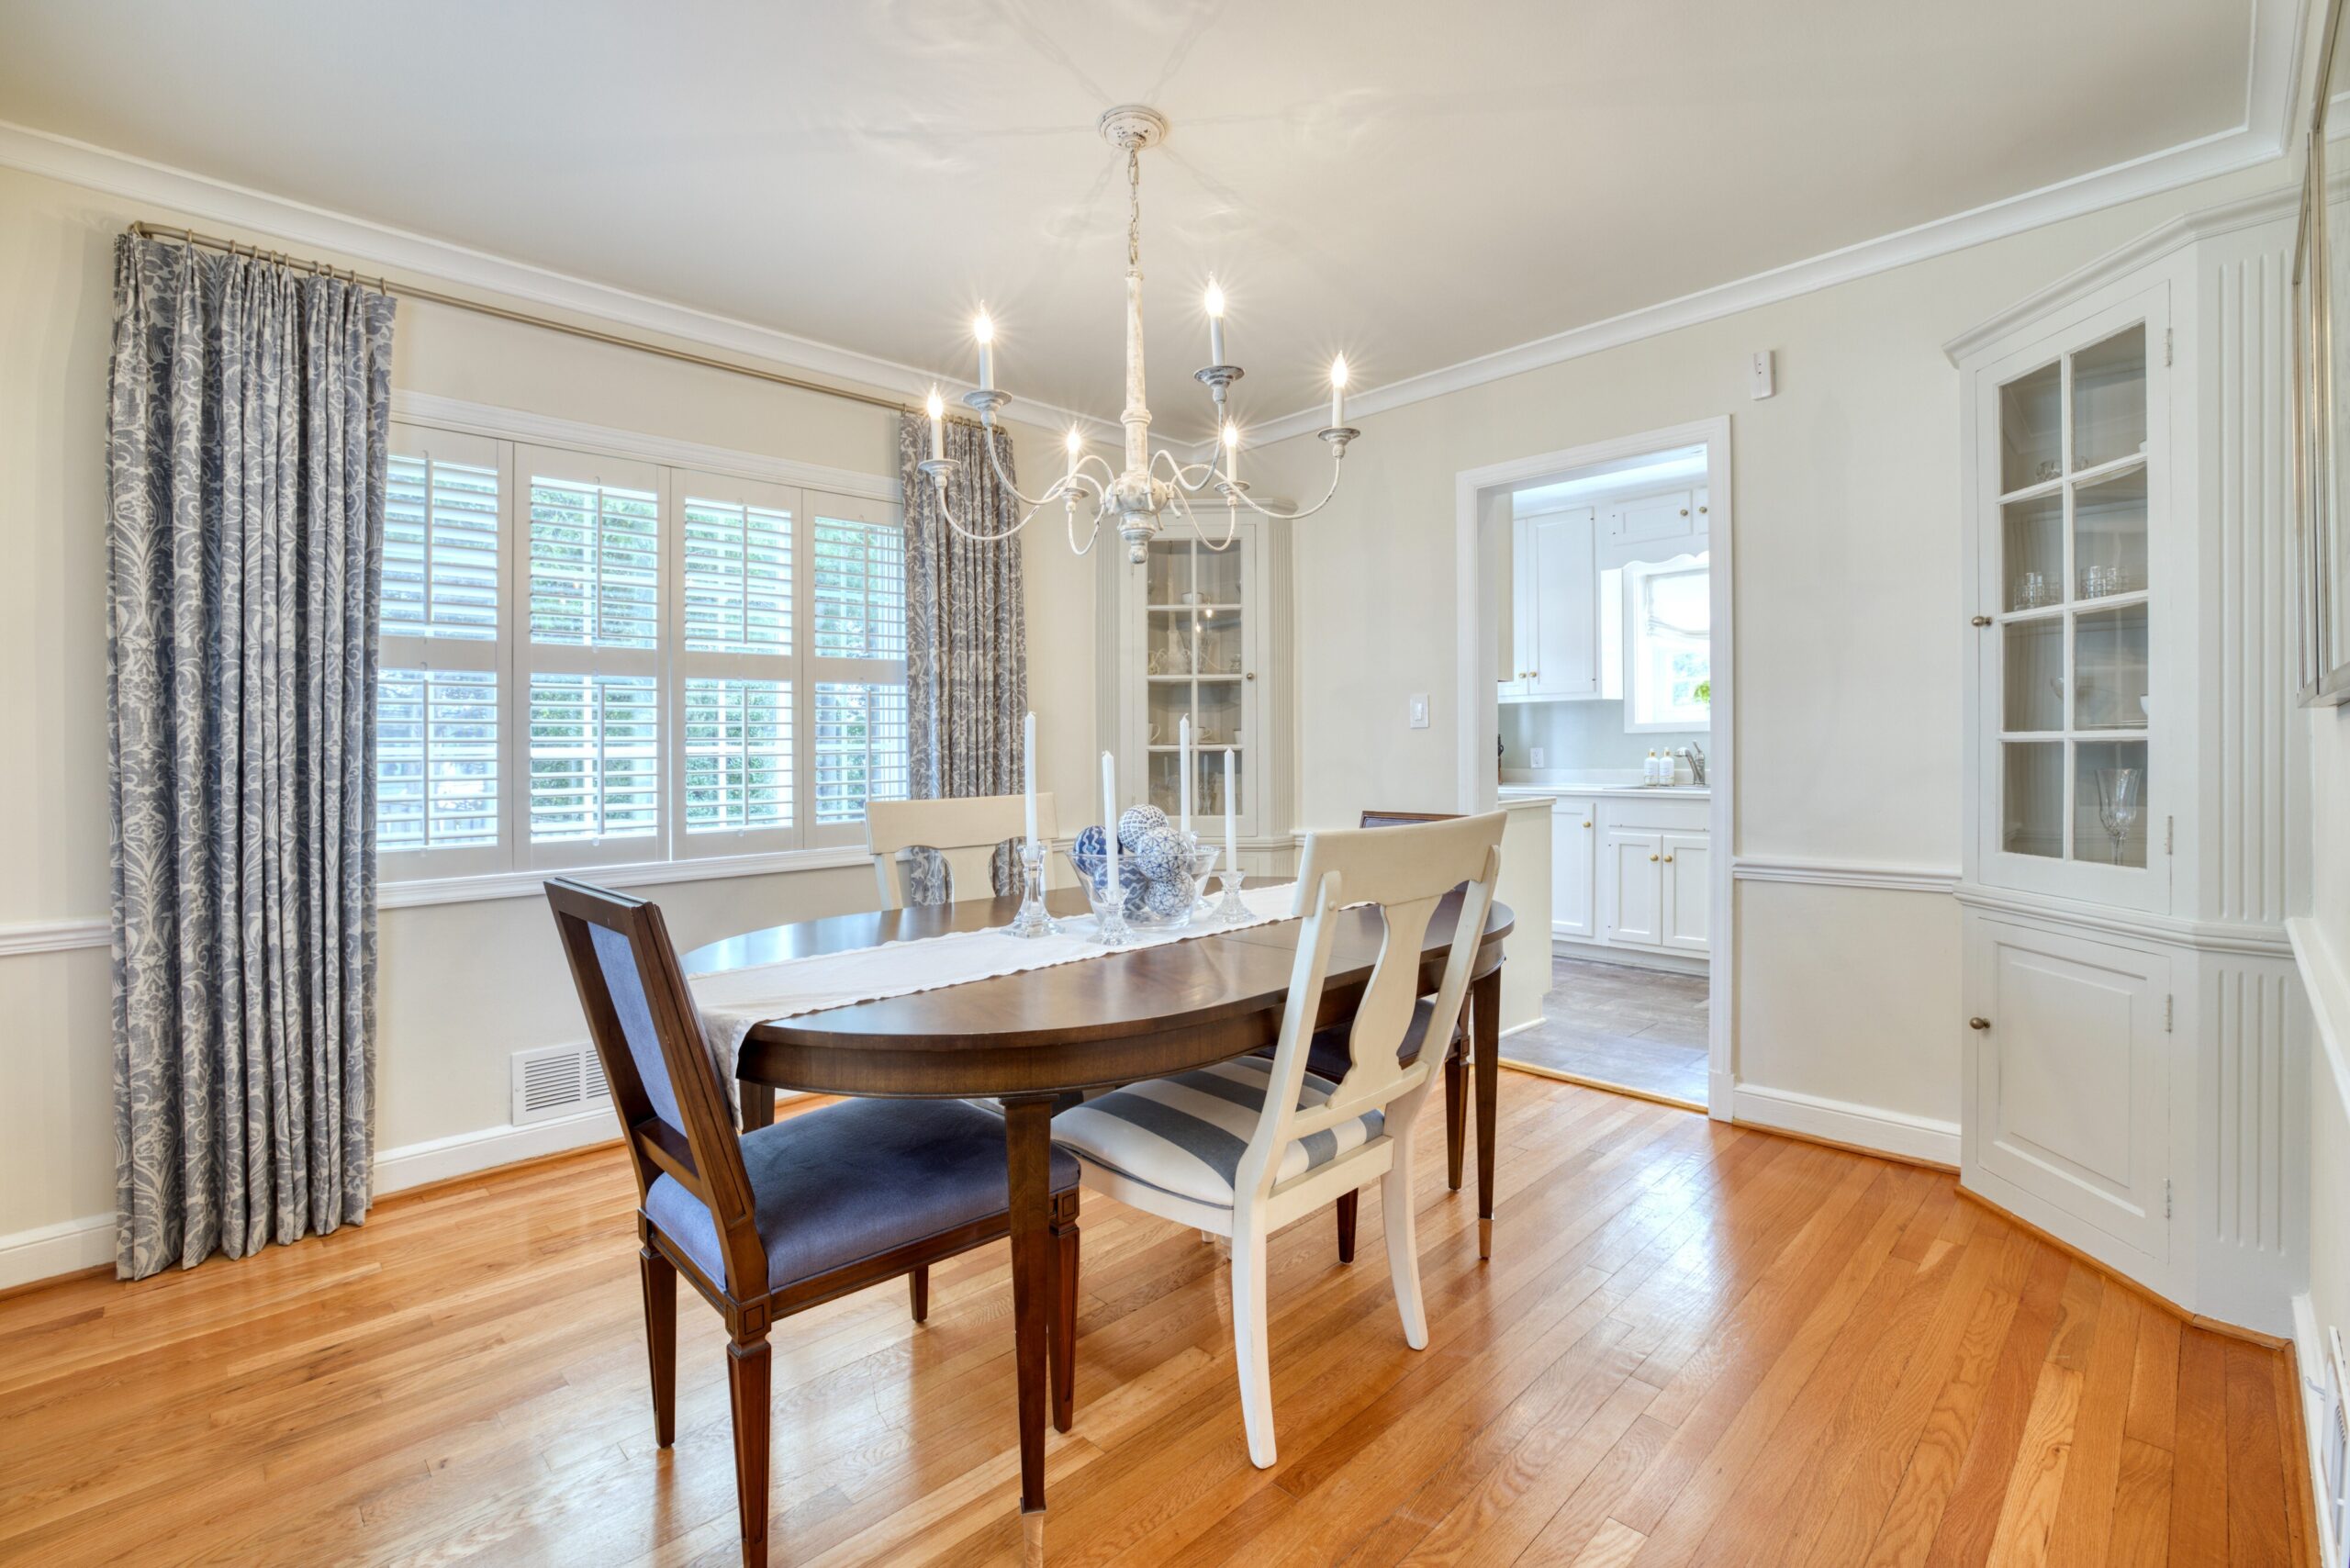 Interior professional photo of dining room of 1946 Cape Cod home in Alexandria, VA with minimalistic staging